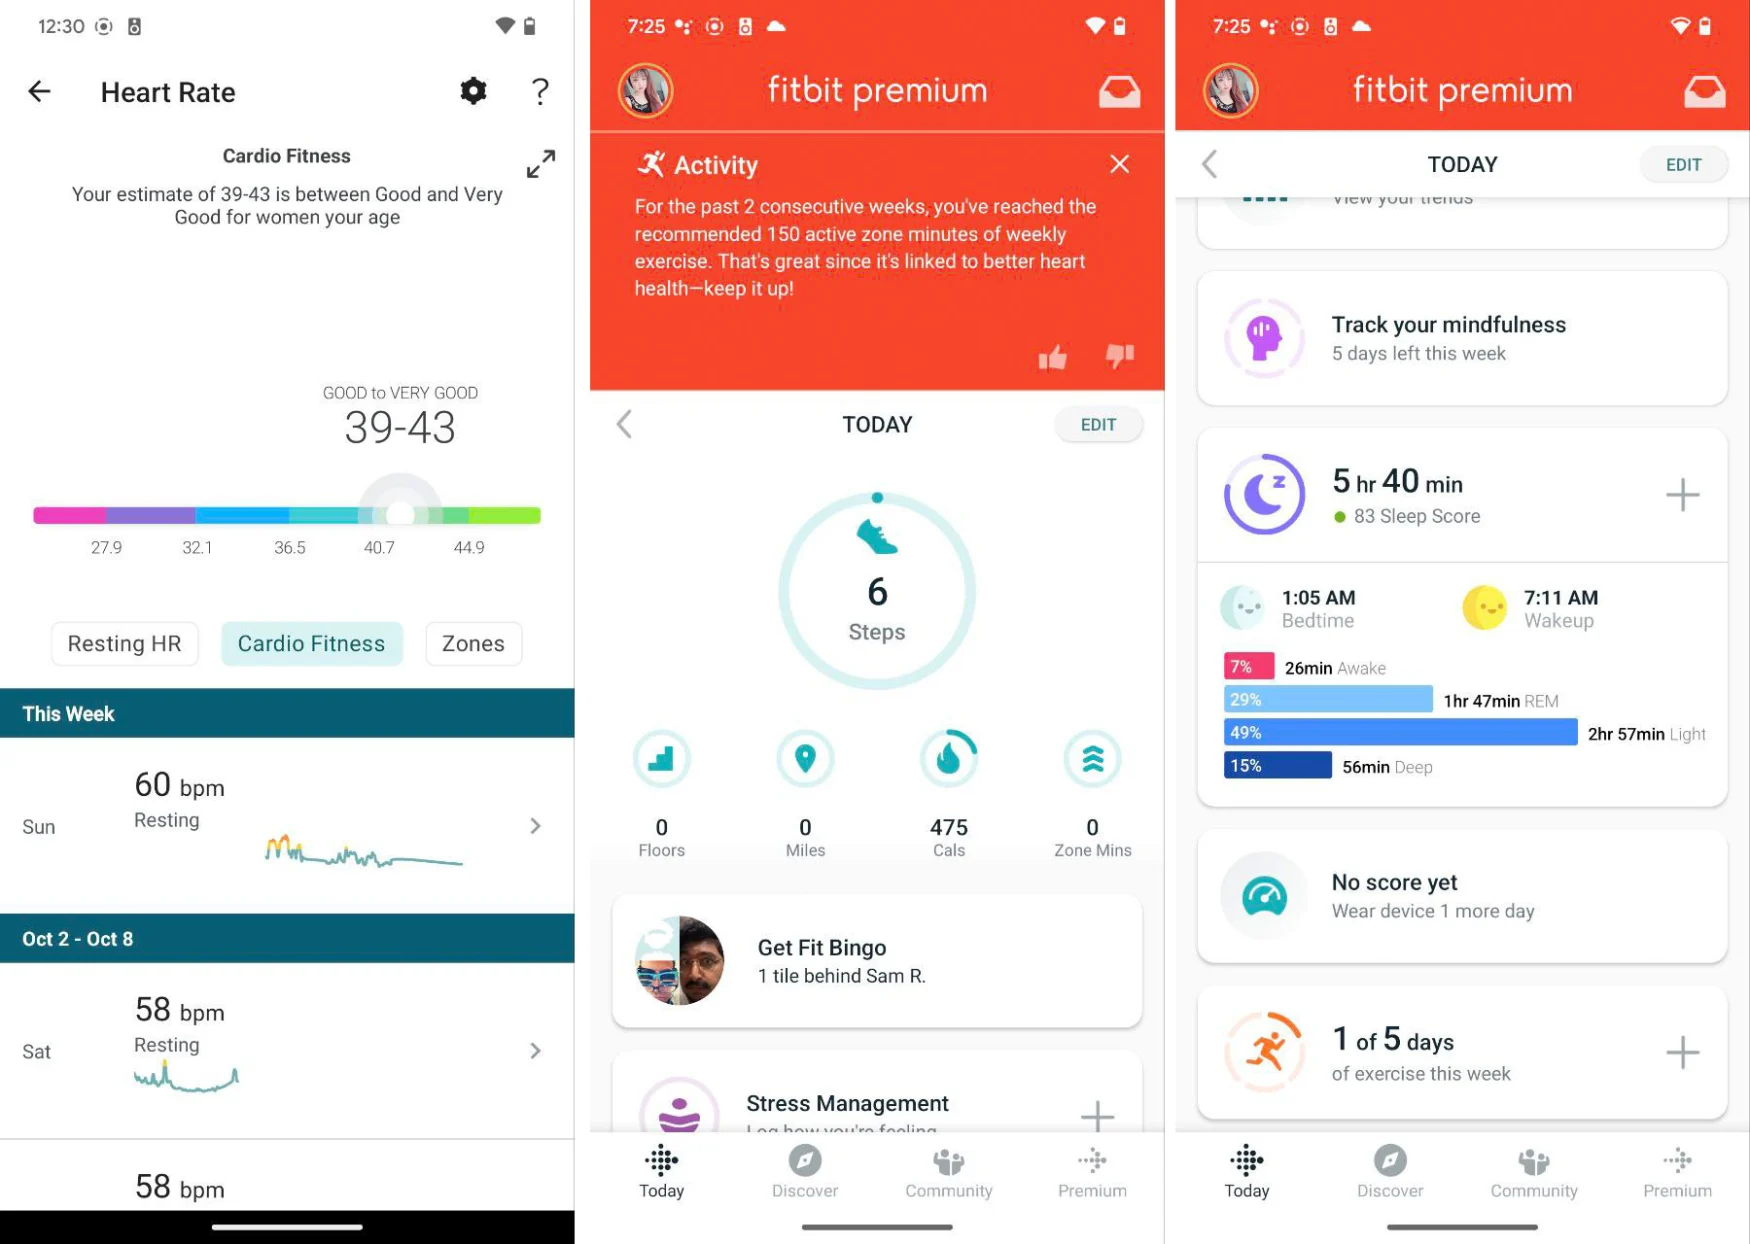 Three screenshots from the Fitbit app showing data from the Pixel Watch. On the two right screenshots, the words Fitbit Premium sit at the top with a red banner. 